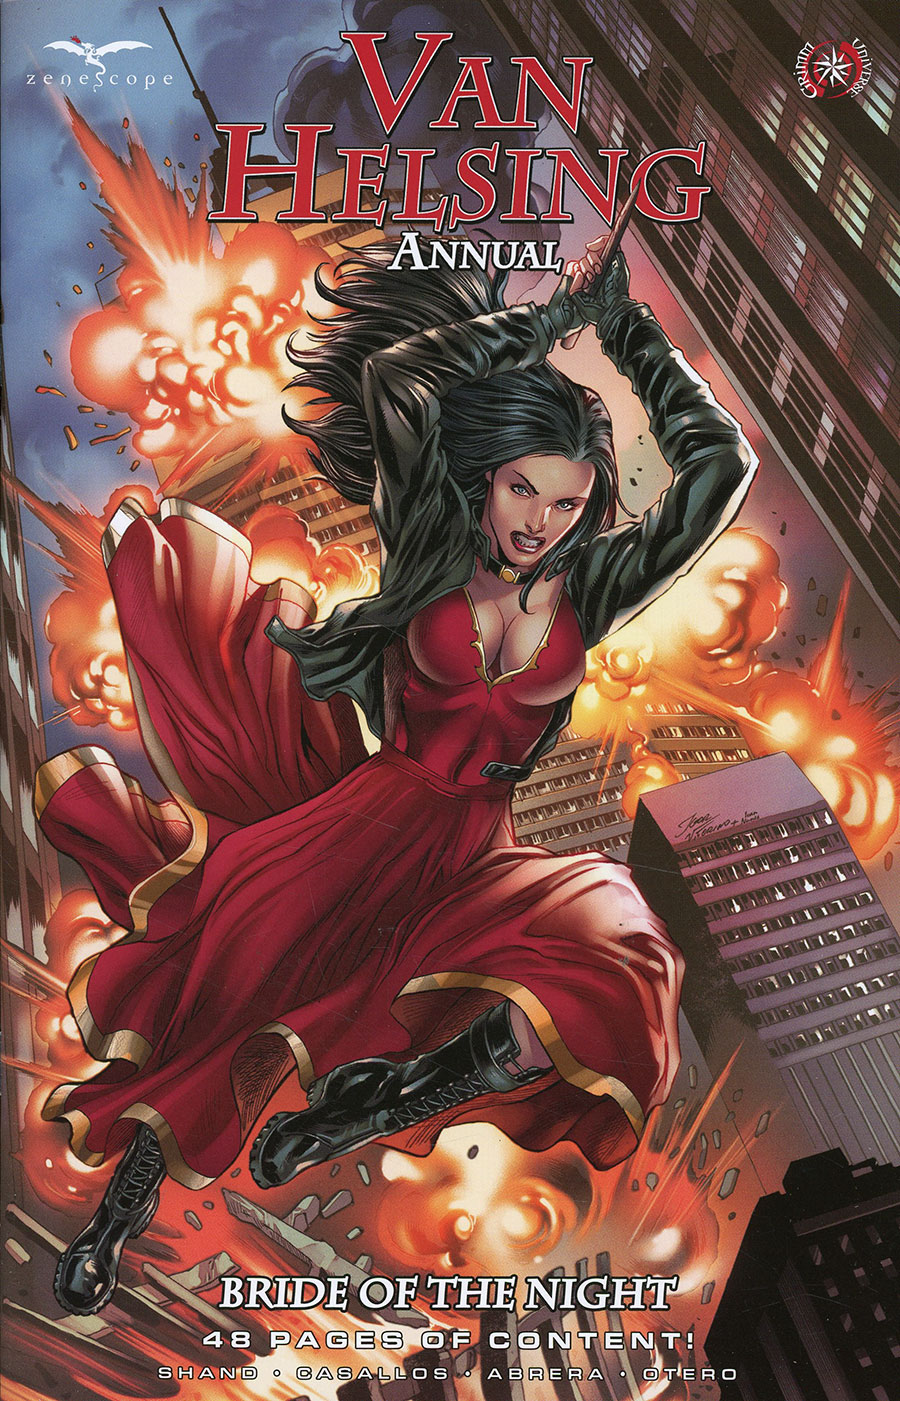 Grimm Fairy Tales Presents Van Helsing Annual Bride Of The Night #1 (One Shot) Cover A Igor Vitorino